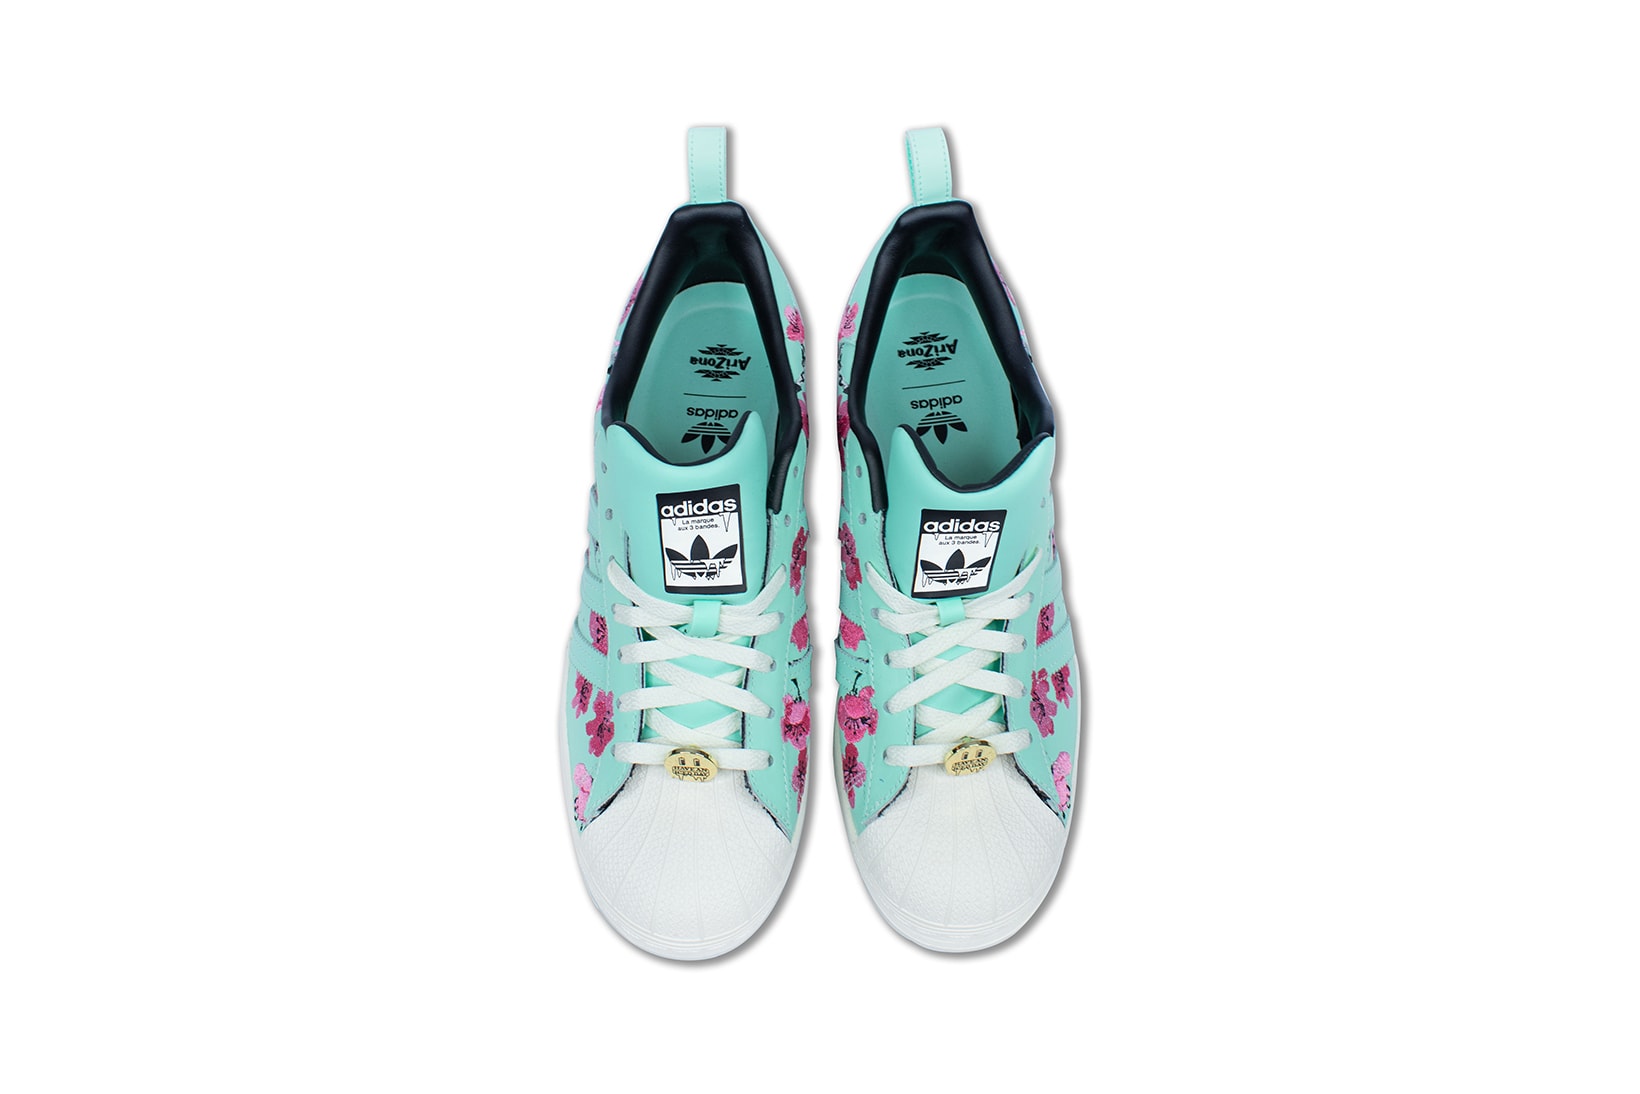 adidas originals arizona iced tea superstar collaboration sneakers big cans aerial birds eye view teal blue laces white gold pink flowers insole black